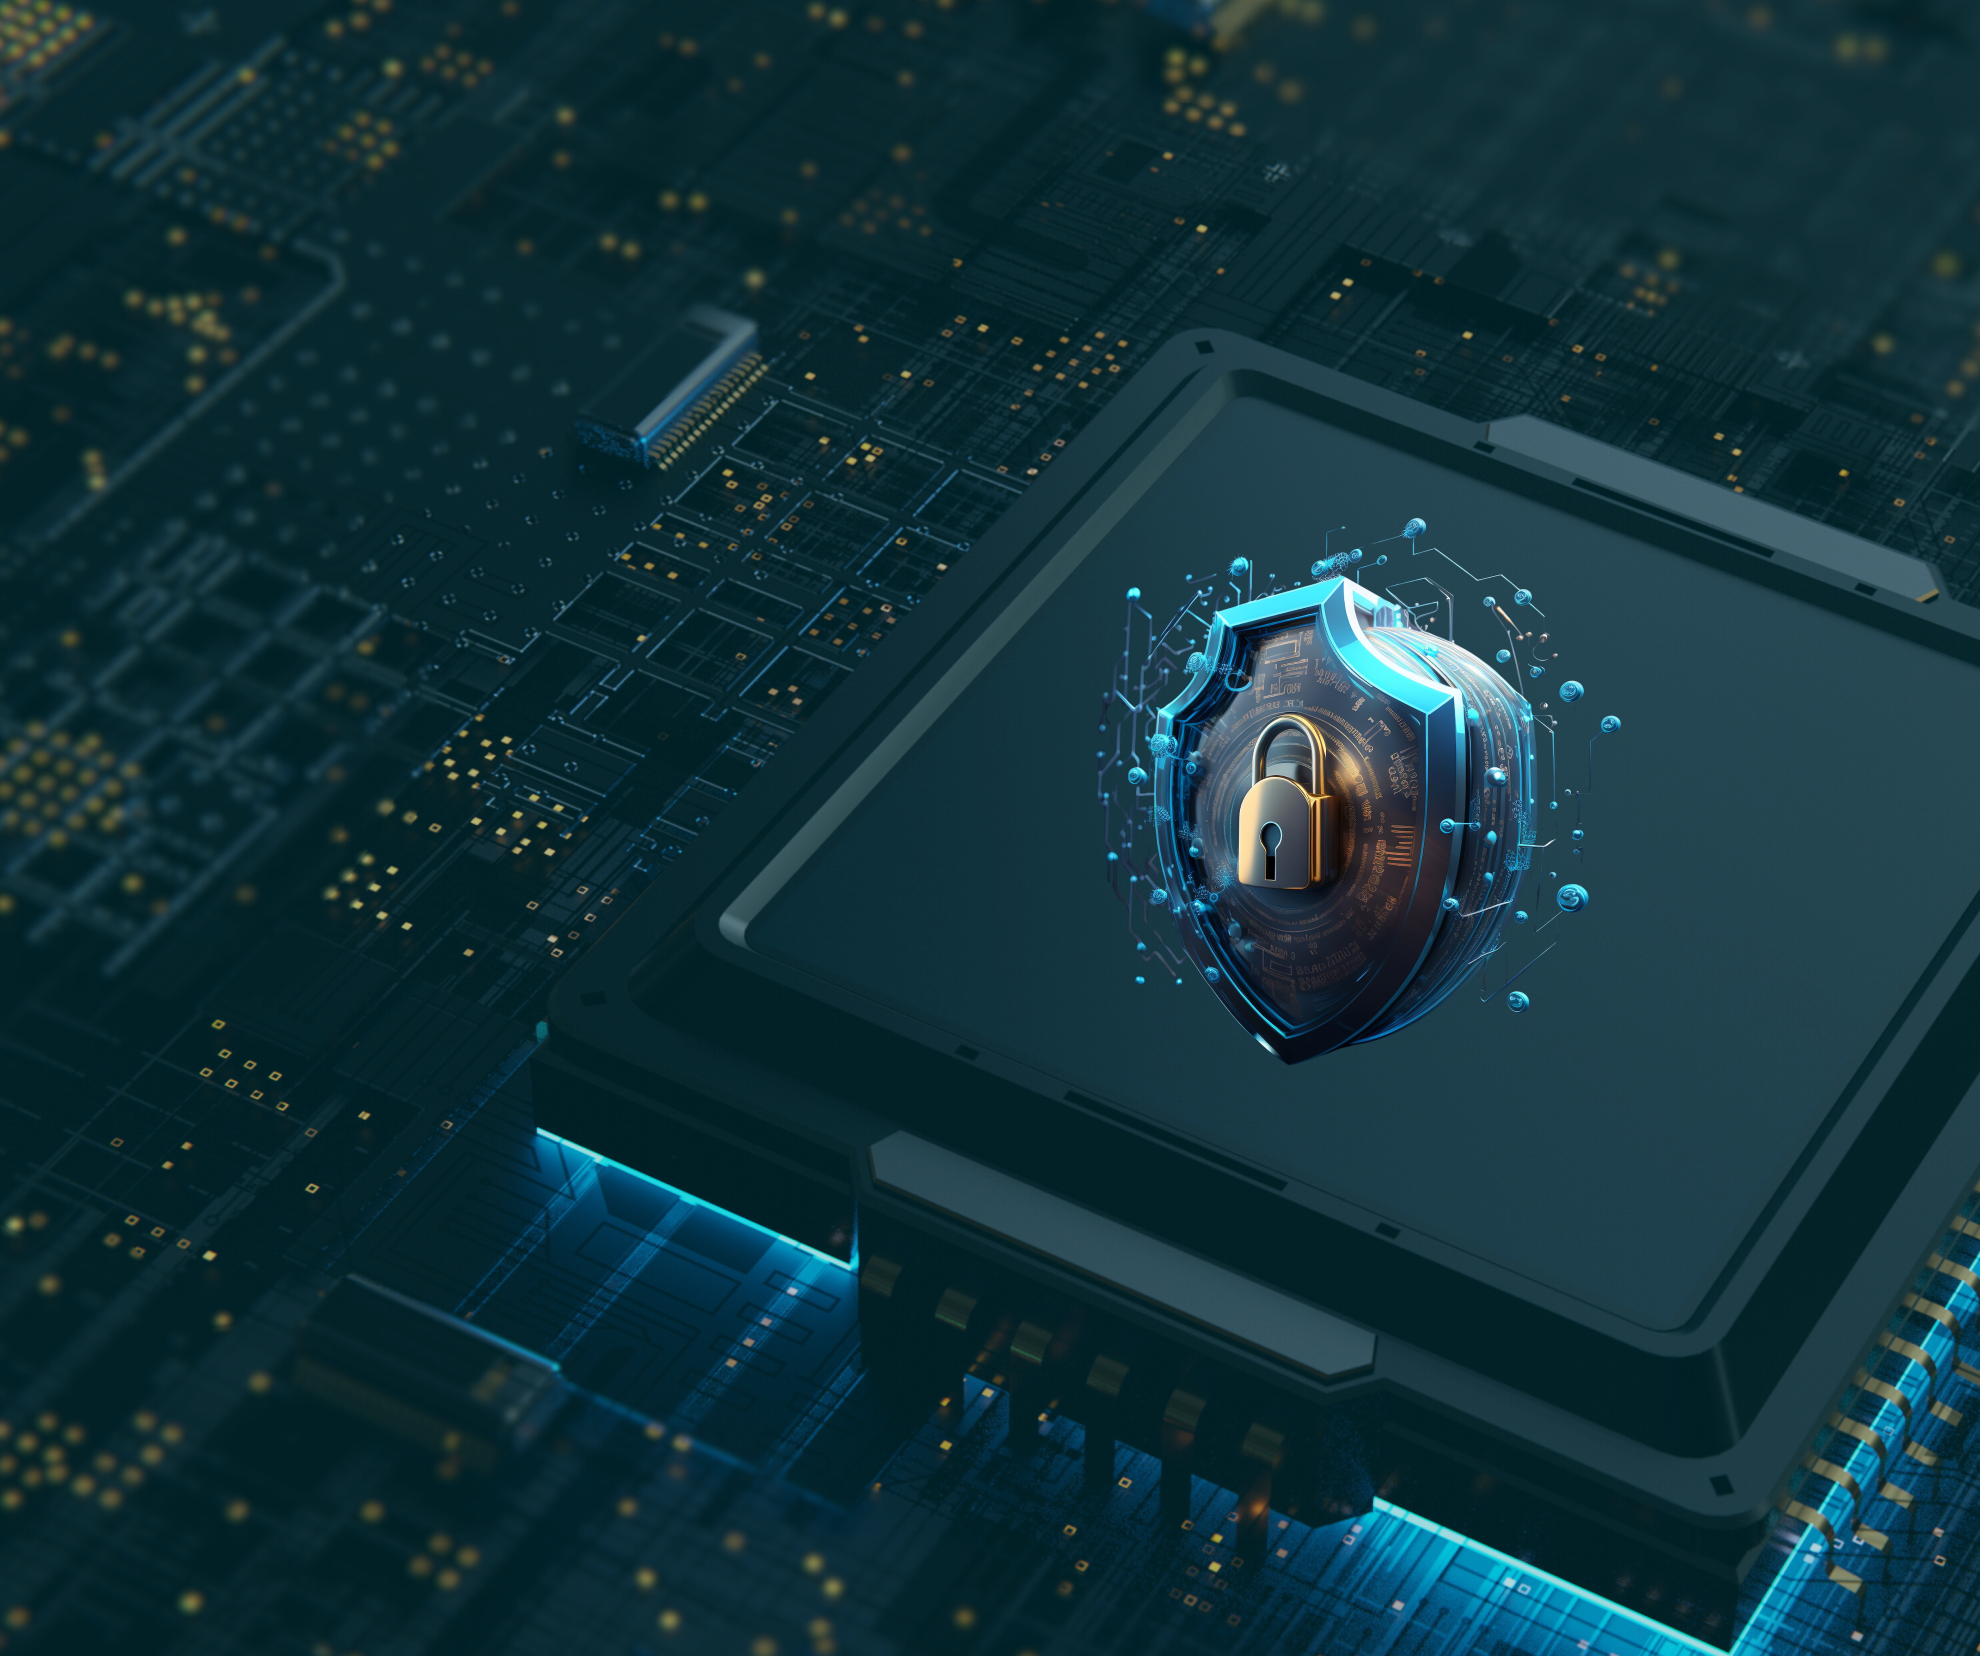 PUFsecurity Unveils Next-Gen Crypto Coprocessor PUFcc7 Featuring High-speed Performance and TLS 1.3 Support